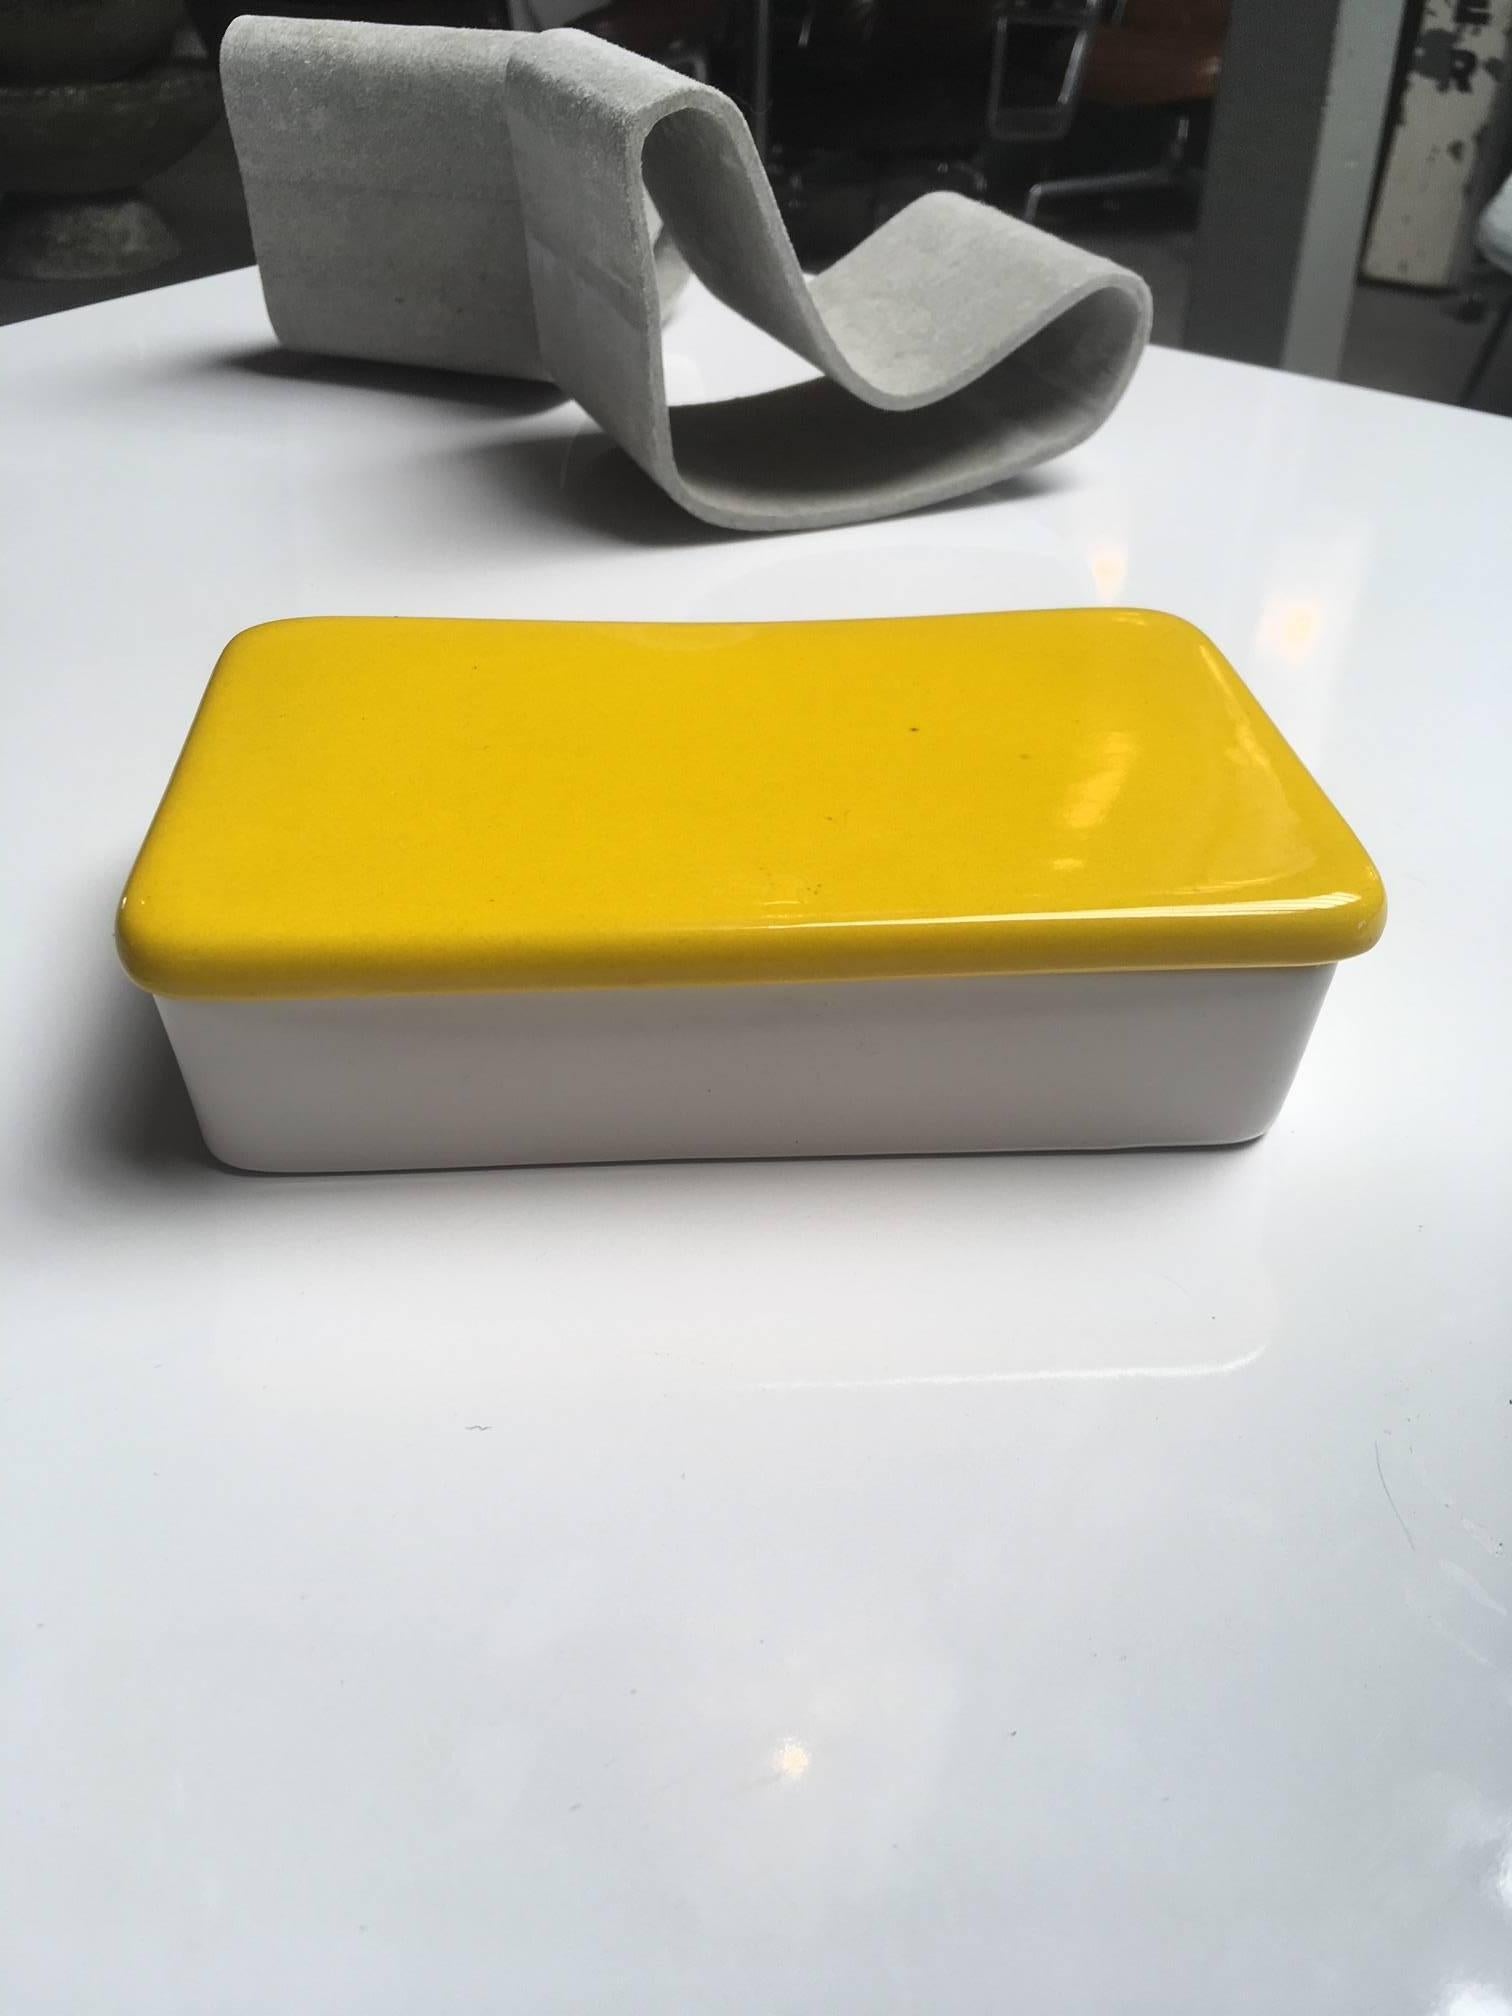 Beautiful ceramic box made in Italy by Raymor. Mustard yellow lid with white base. Excellent vintage condition. Perfect stash box or tabletop object.